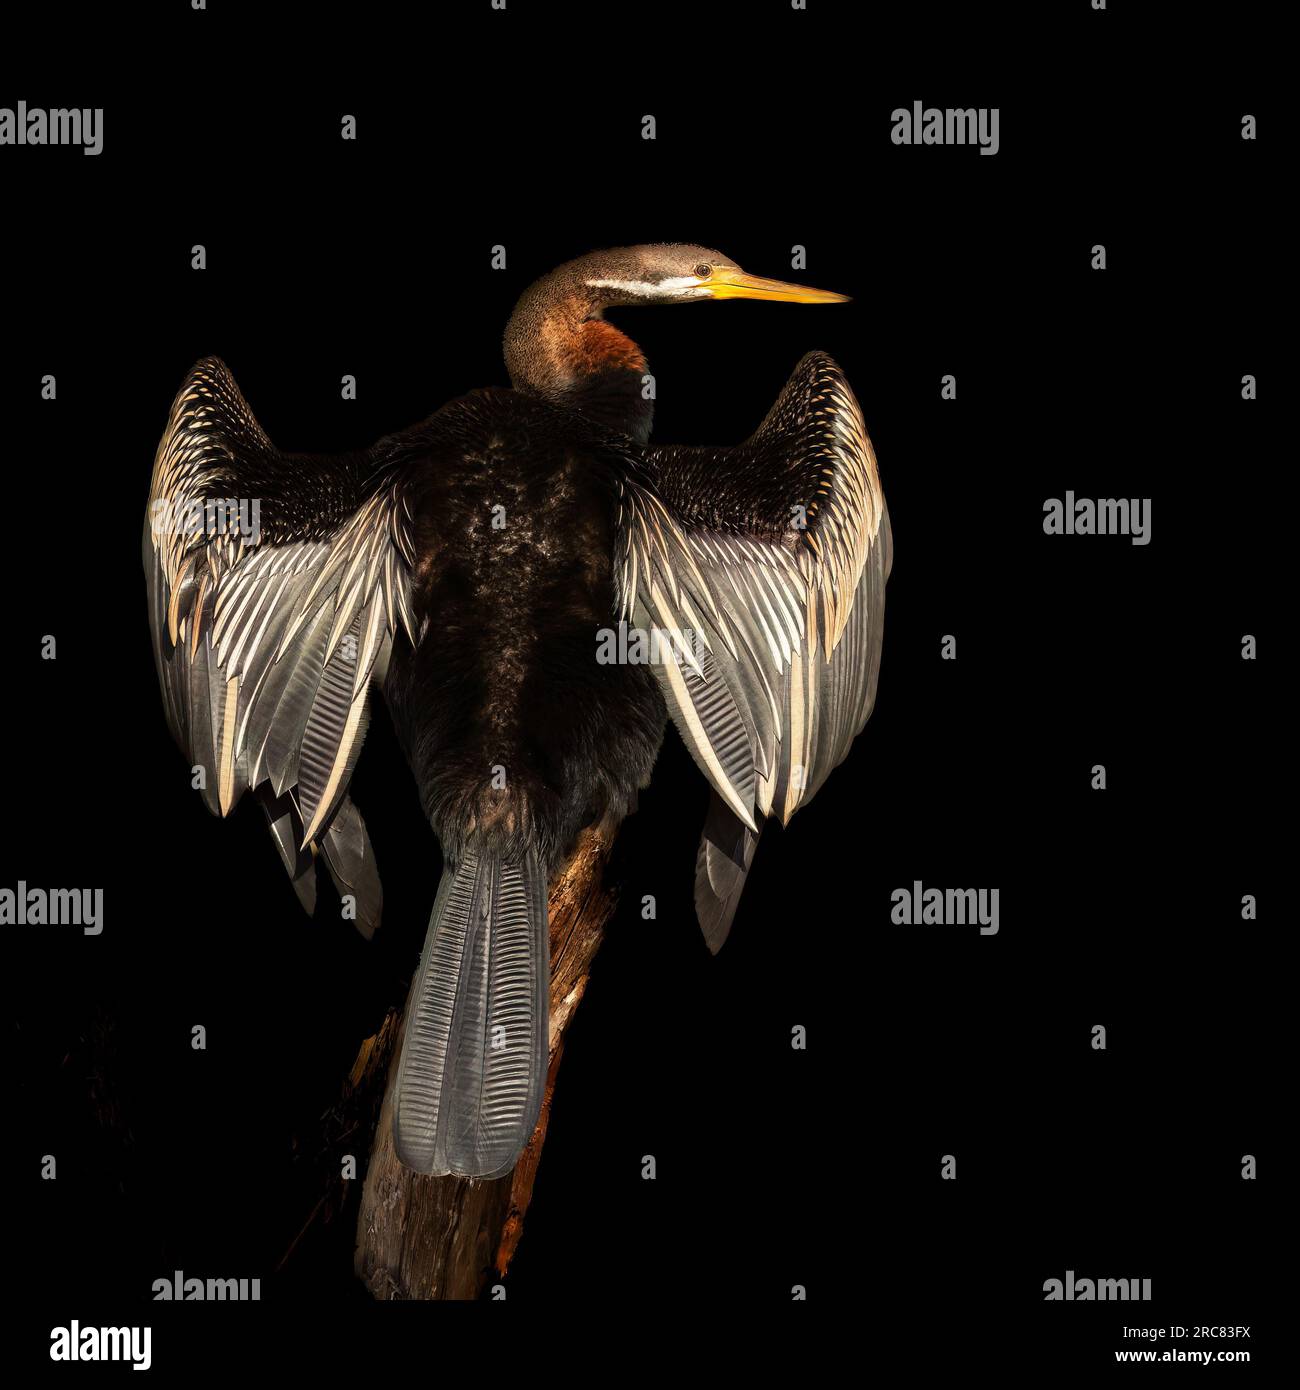 Australian darter (Anhinga novaehollandiae) water bird that spears fish with it's wings open drying in the sun on a isolated black background. Stock Photo